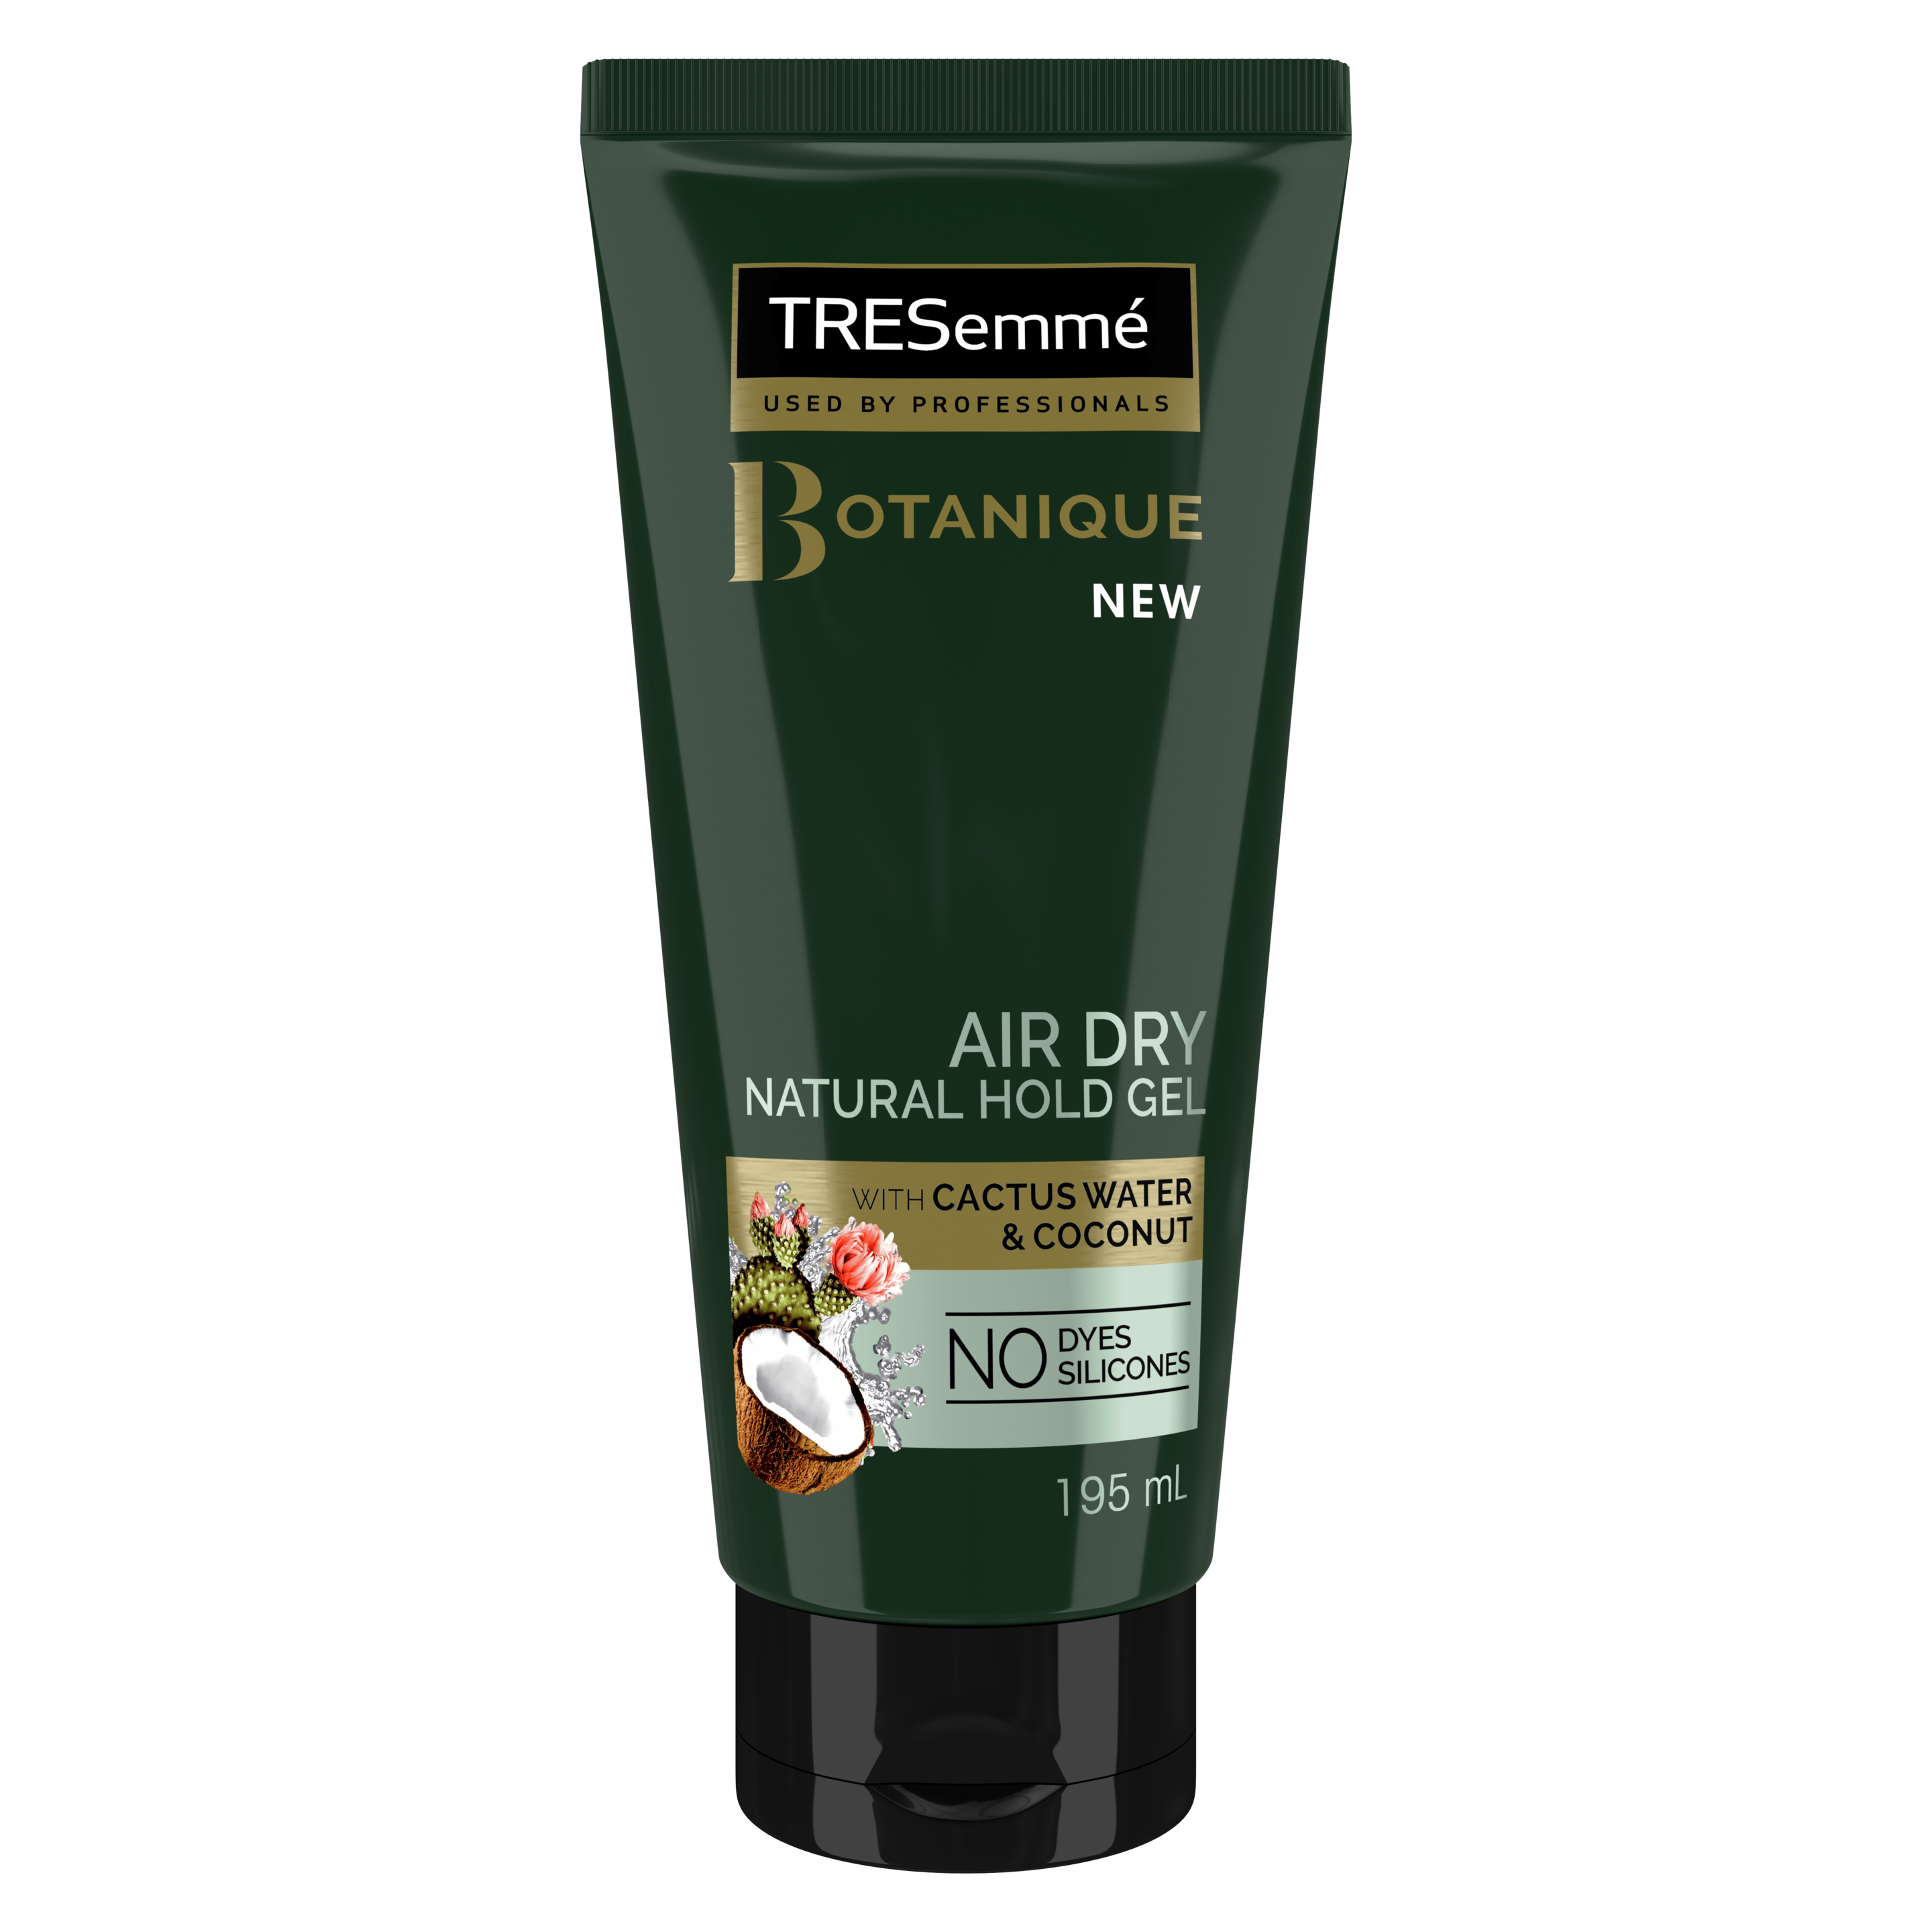 A 195ml bottle of TRESemme Botanique Air Dry Natural hold gel 195ml Front of Pack